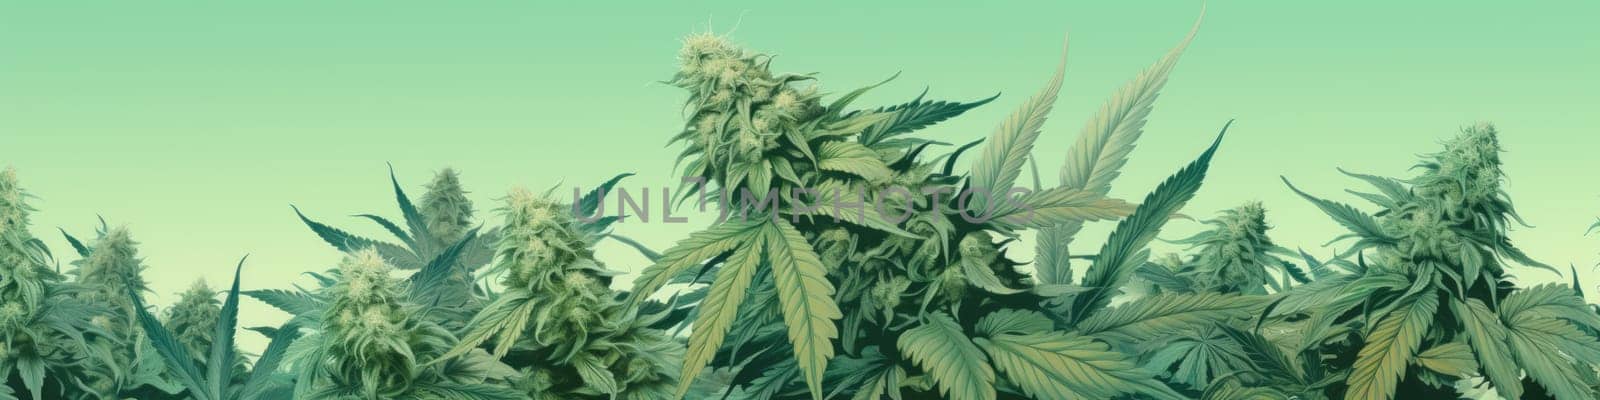 Marijuana plant and leaves as banner, cannabis, especially as smoked or consumed as a psychoactive drug, nature coconut by Kadula